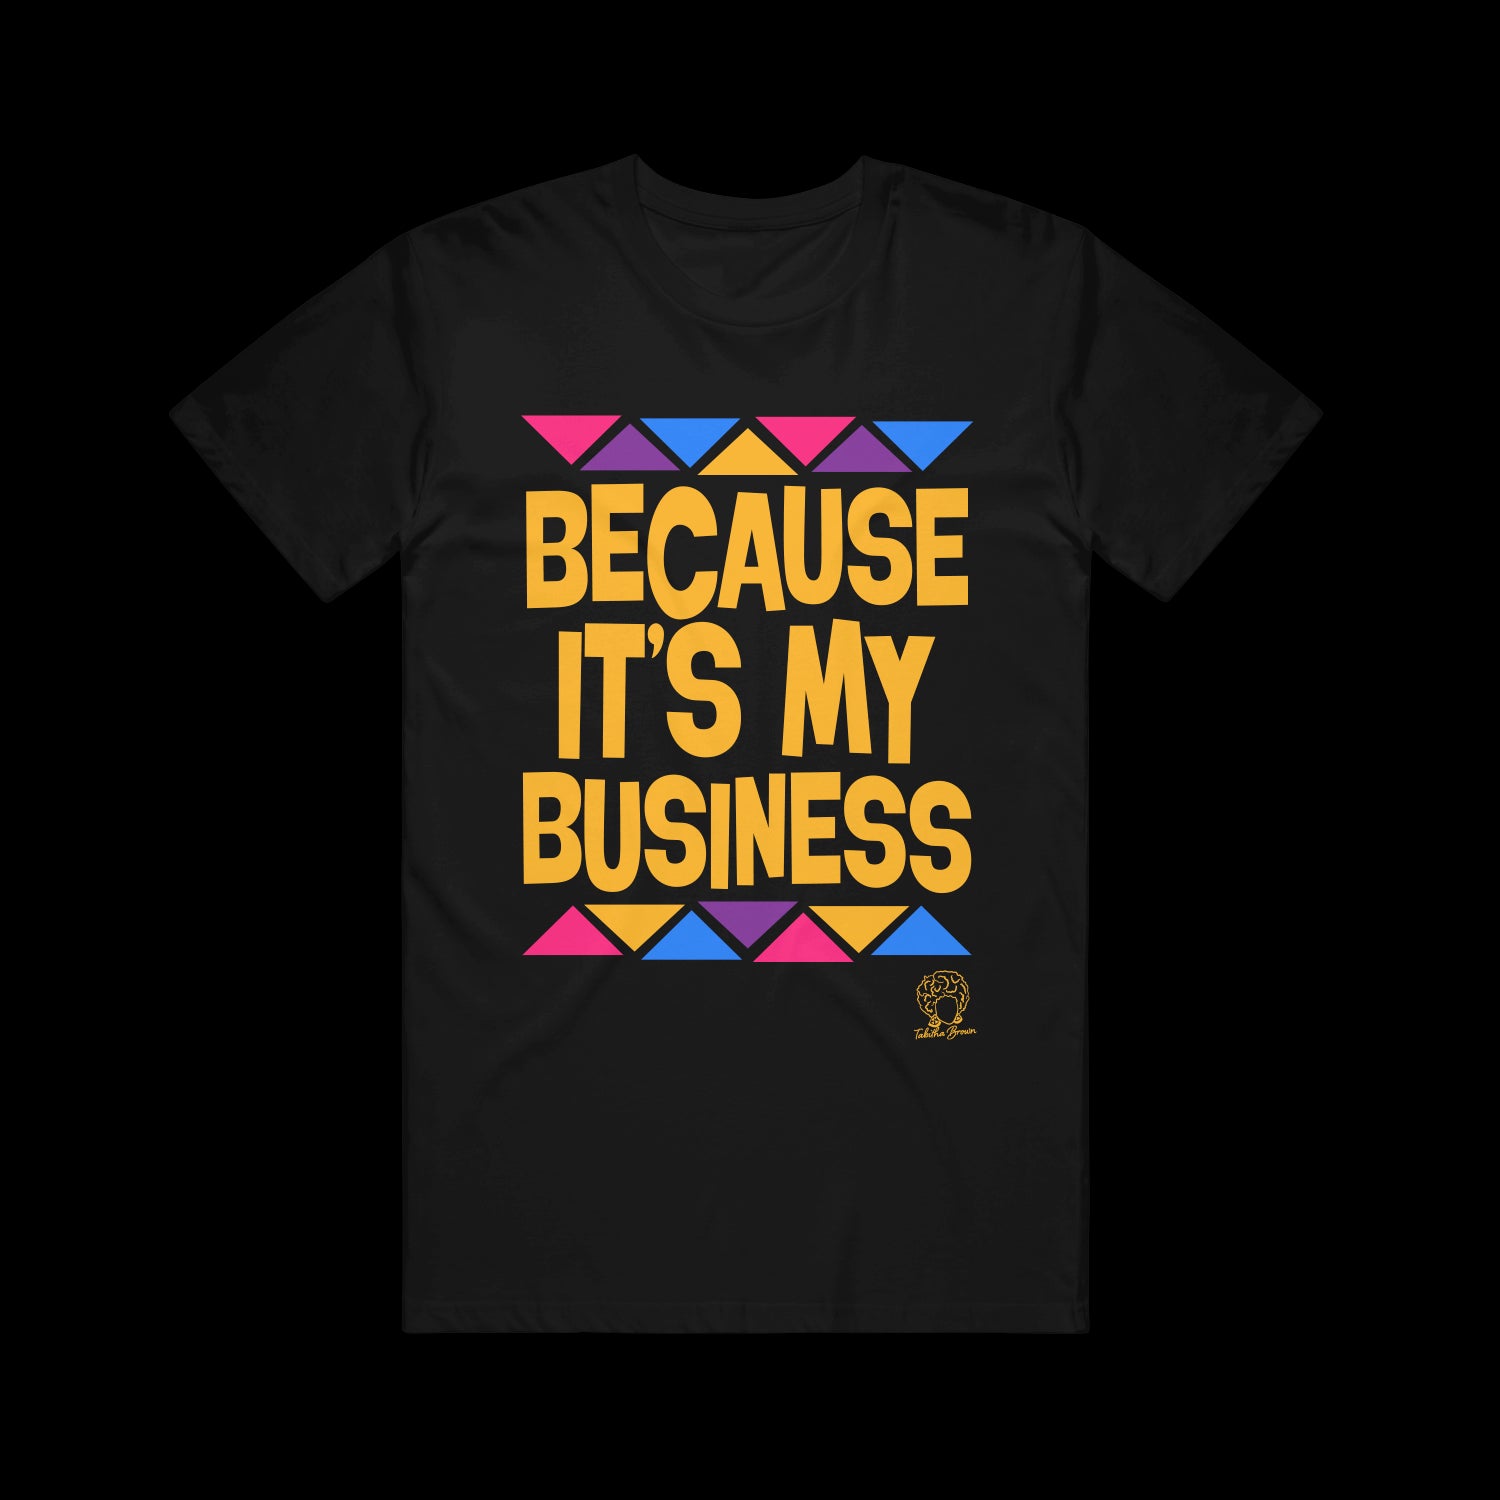 Because It's My Business (Triangles) Black T-Shirt